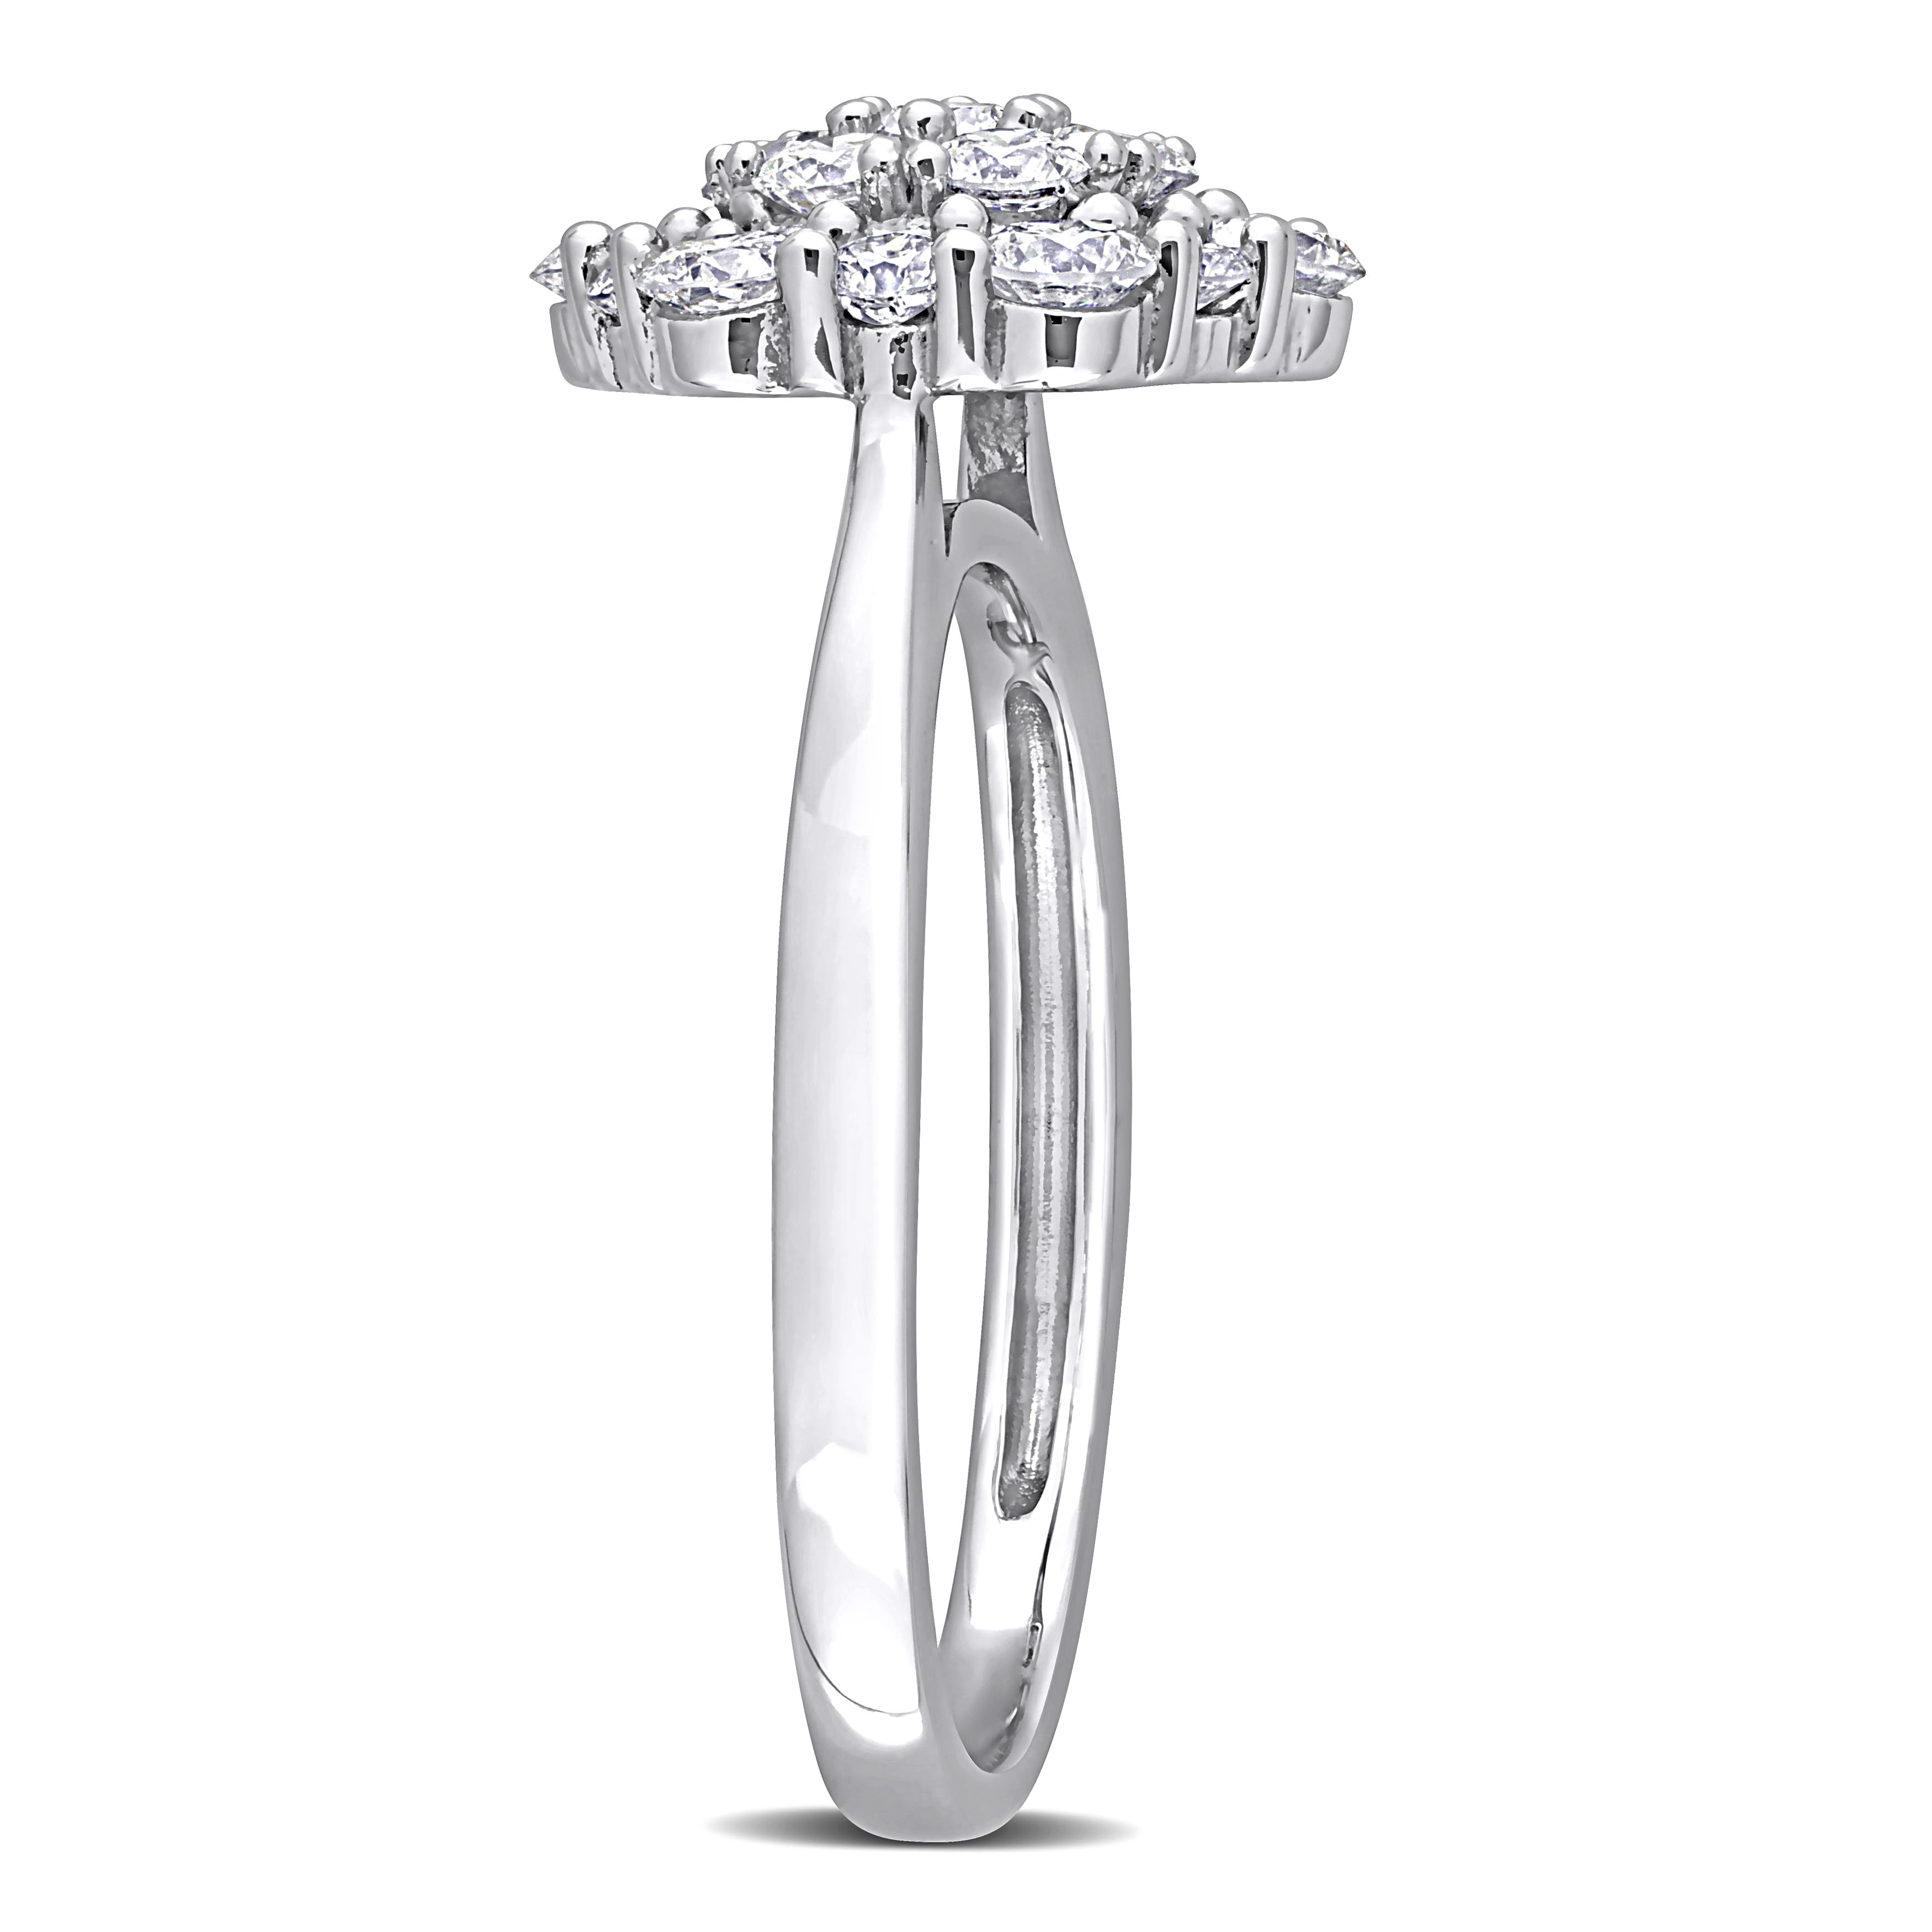 1 CT TW Diamond Cluster Engagement Ring in 10k White Gold